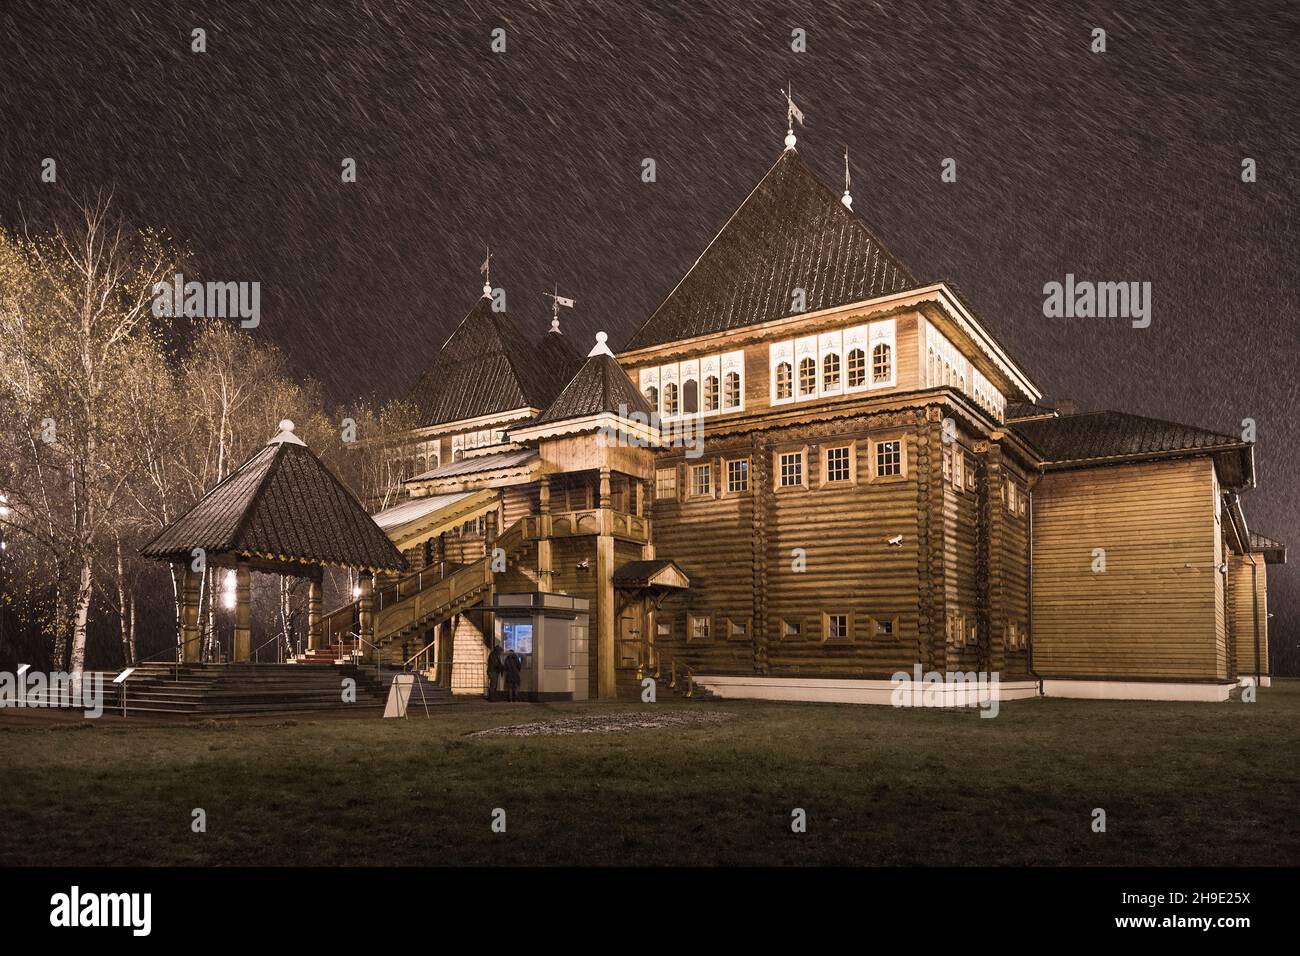 MOSCOW, RUSSIA - NOVEMBER 22, 2015: Tsar Alexei Mikhailovich Palace - a wooden royal palace built in the village of Kolomenskoye outside Moscow in the Stock Photo